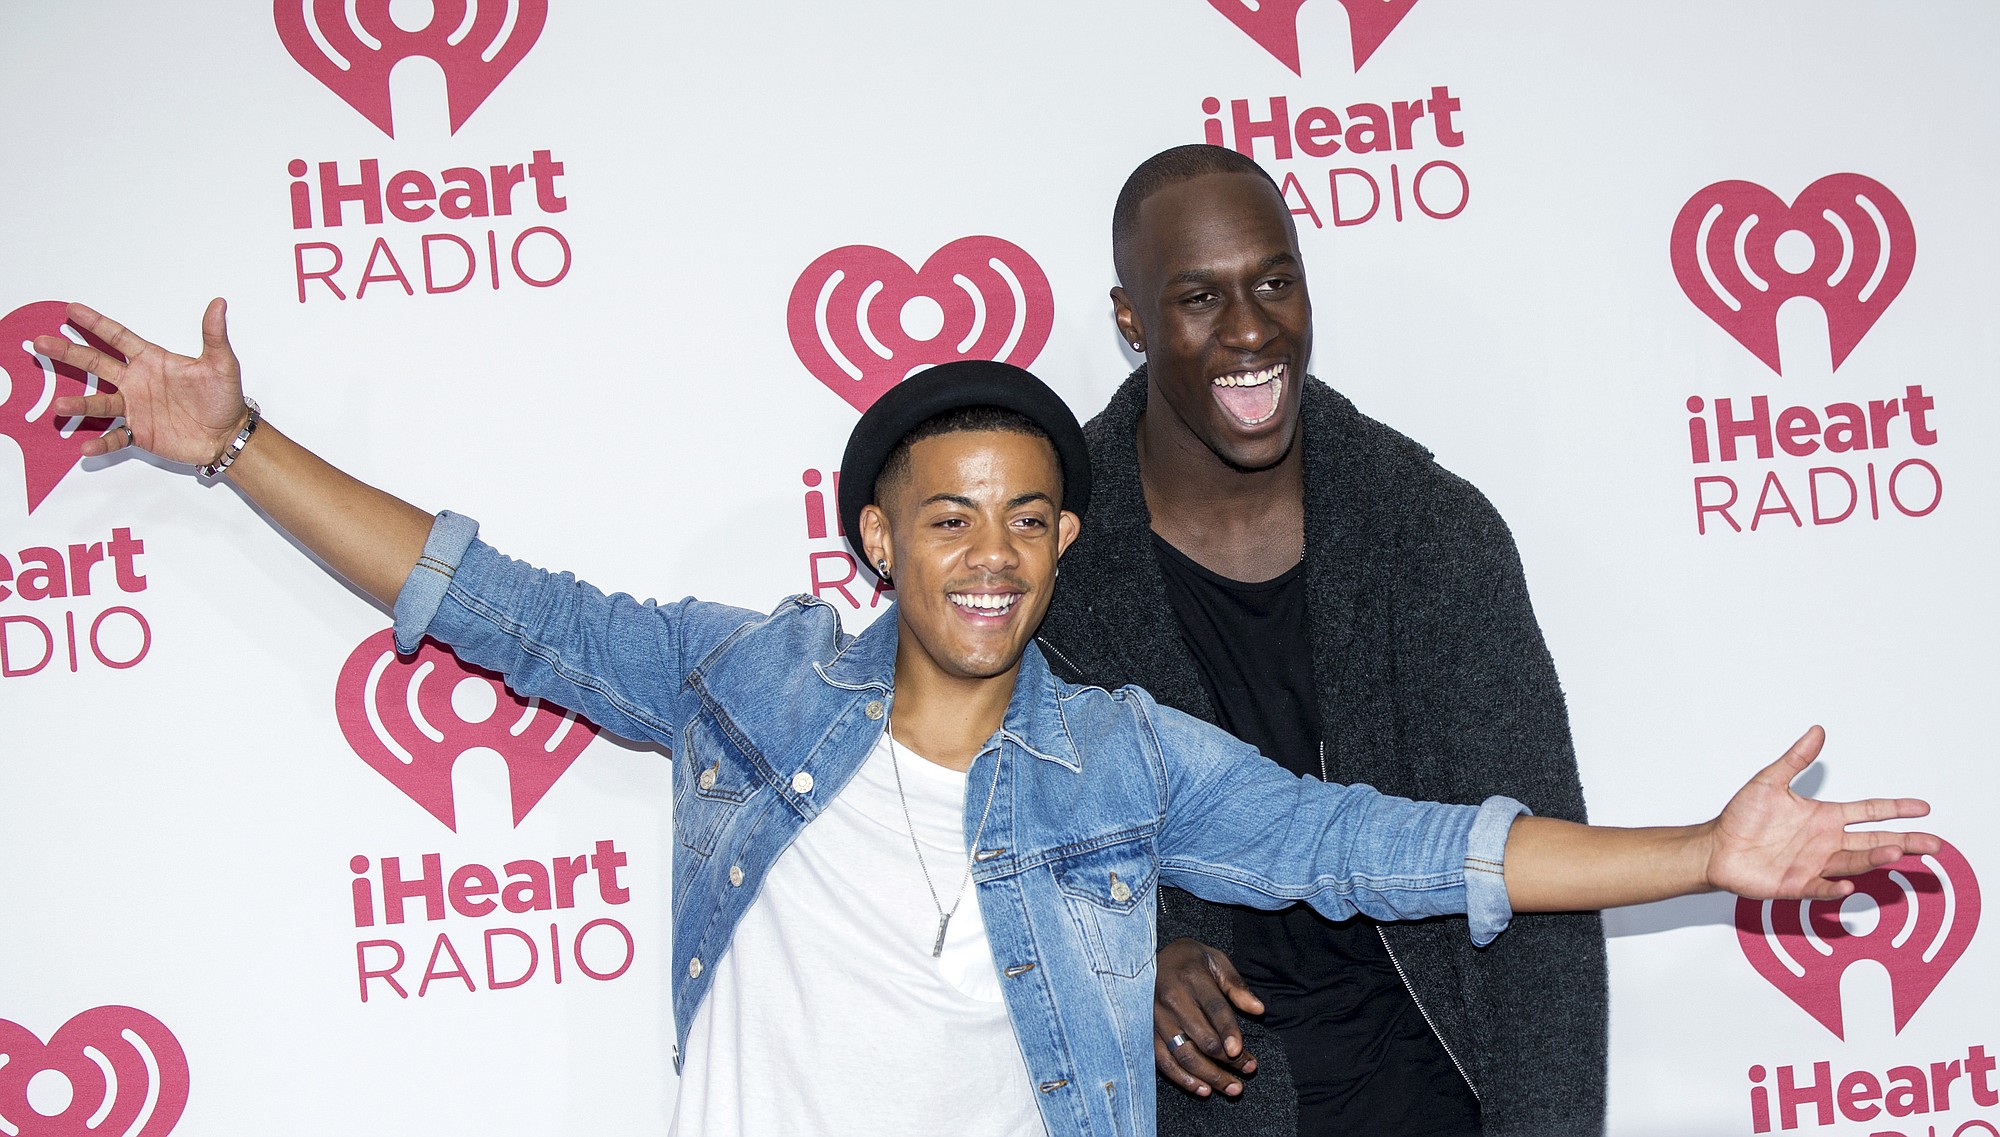 Invision files
Nico and Vinz arrive at the iHeartRadio Music Festival at The MGM Grand Garden Arena in Las Vegas. The Norwegian duo has sold 2 million tracks and led to international fame.